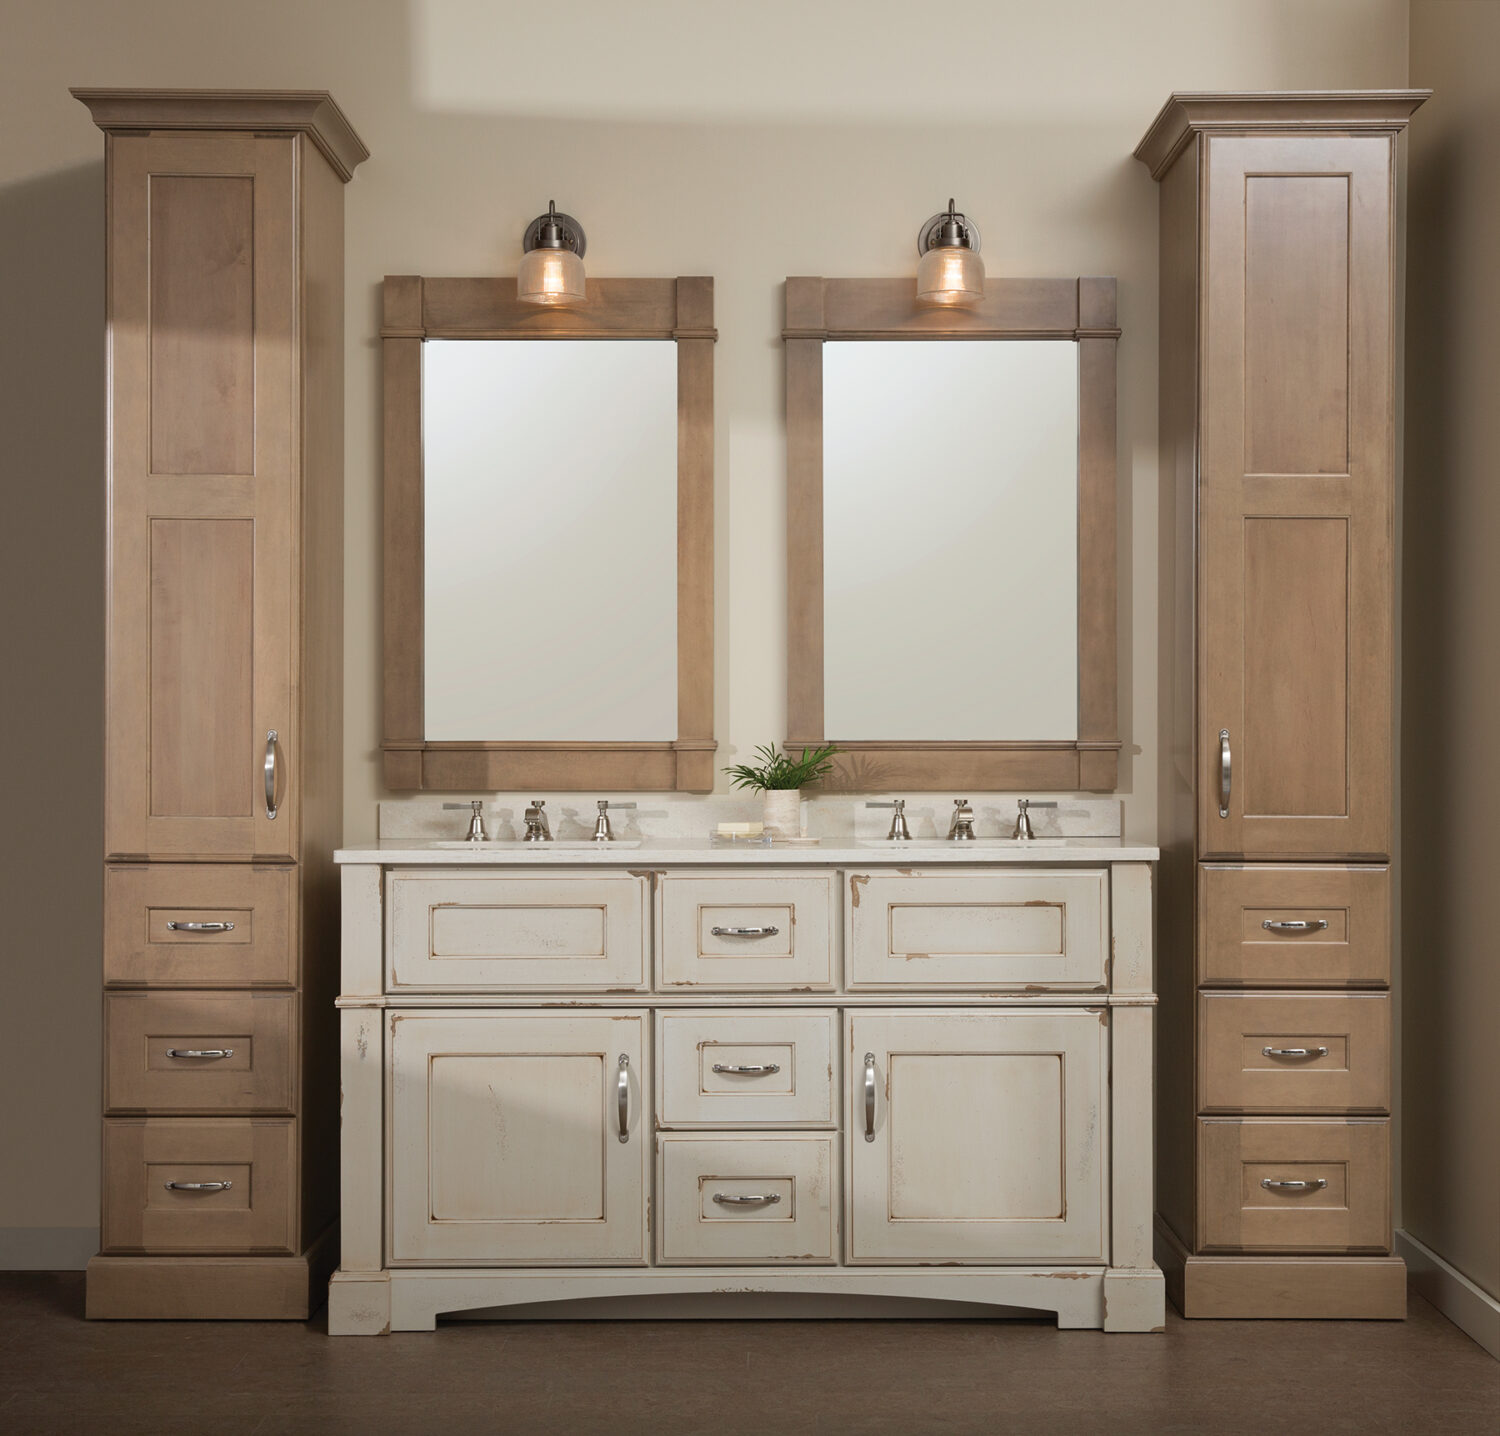 A rustic, shabby chic styled bathroom furniture collection with one double sink vanity and two free-standing linen cabinets on each side.